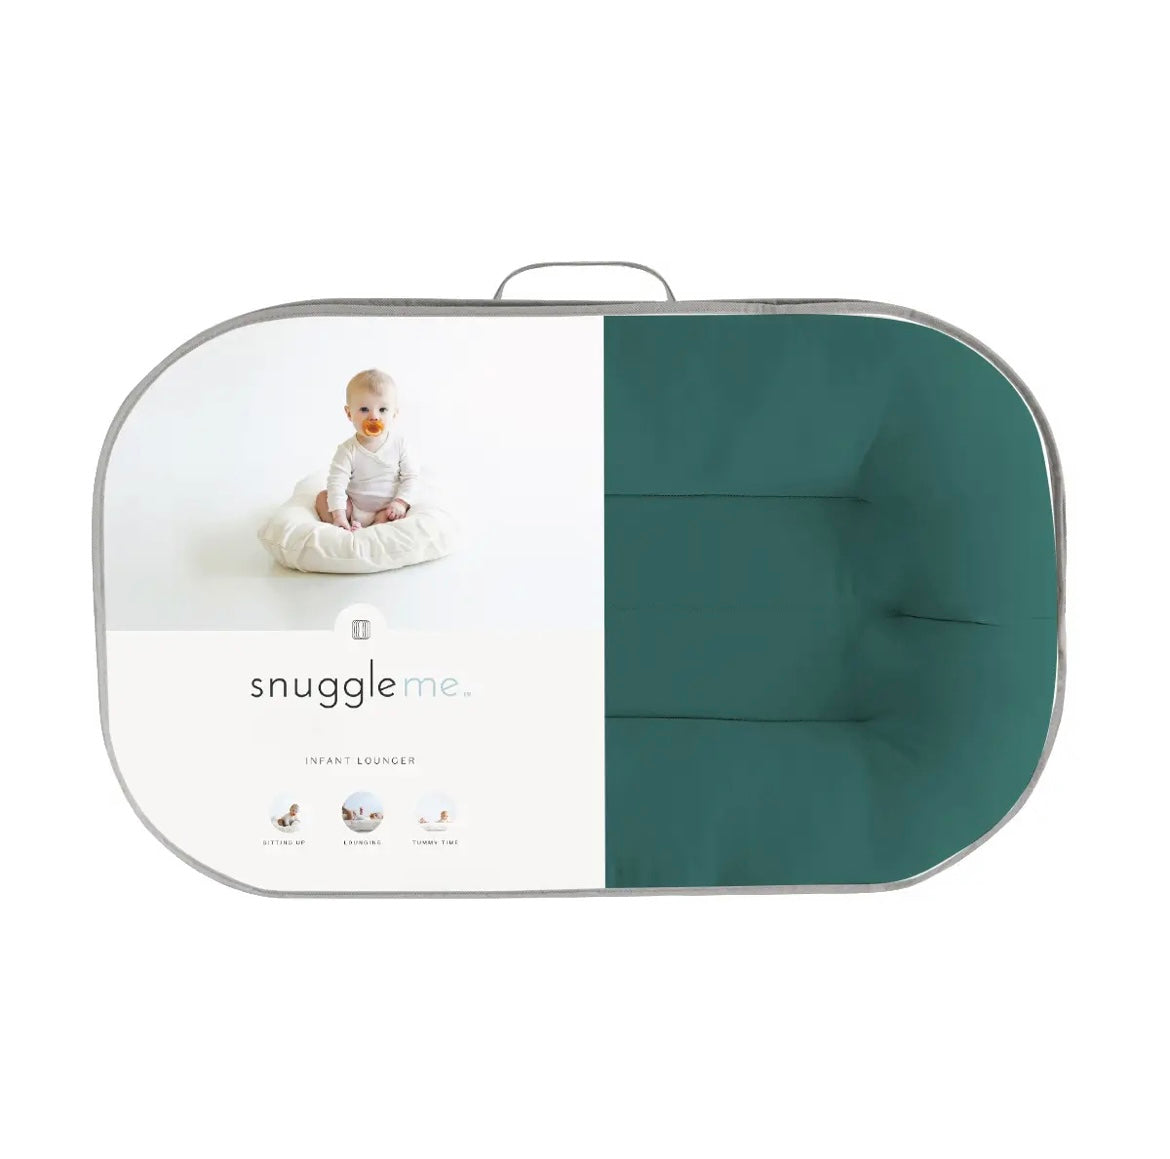 Snuggle Me Organic Lounger – The Baby'z Room